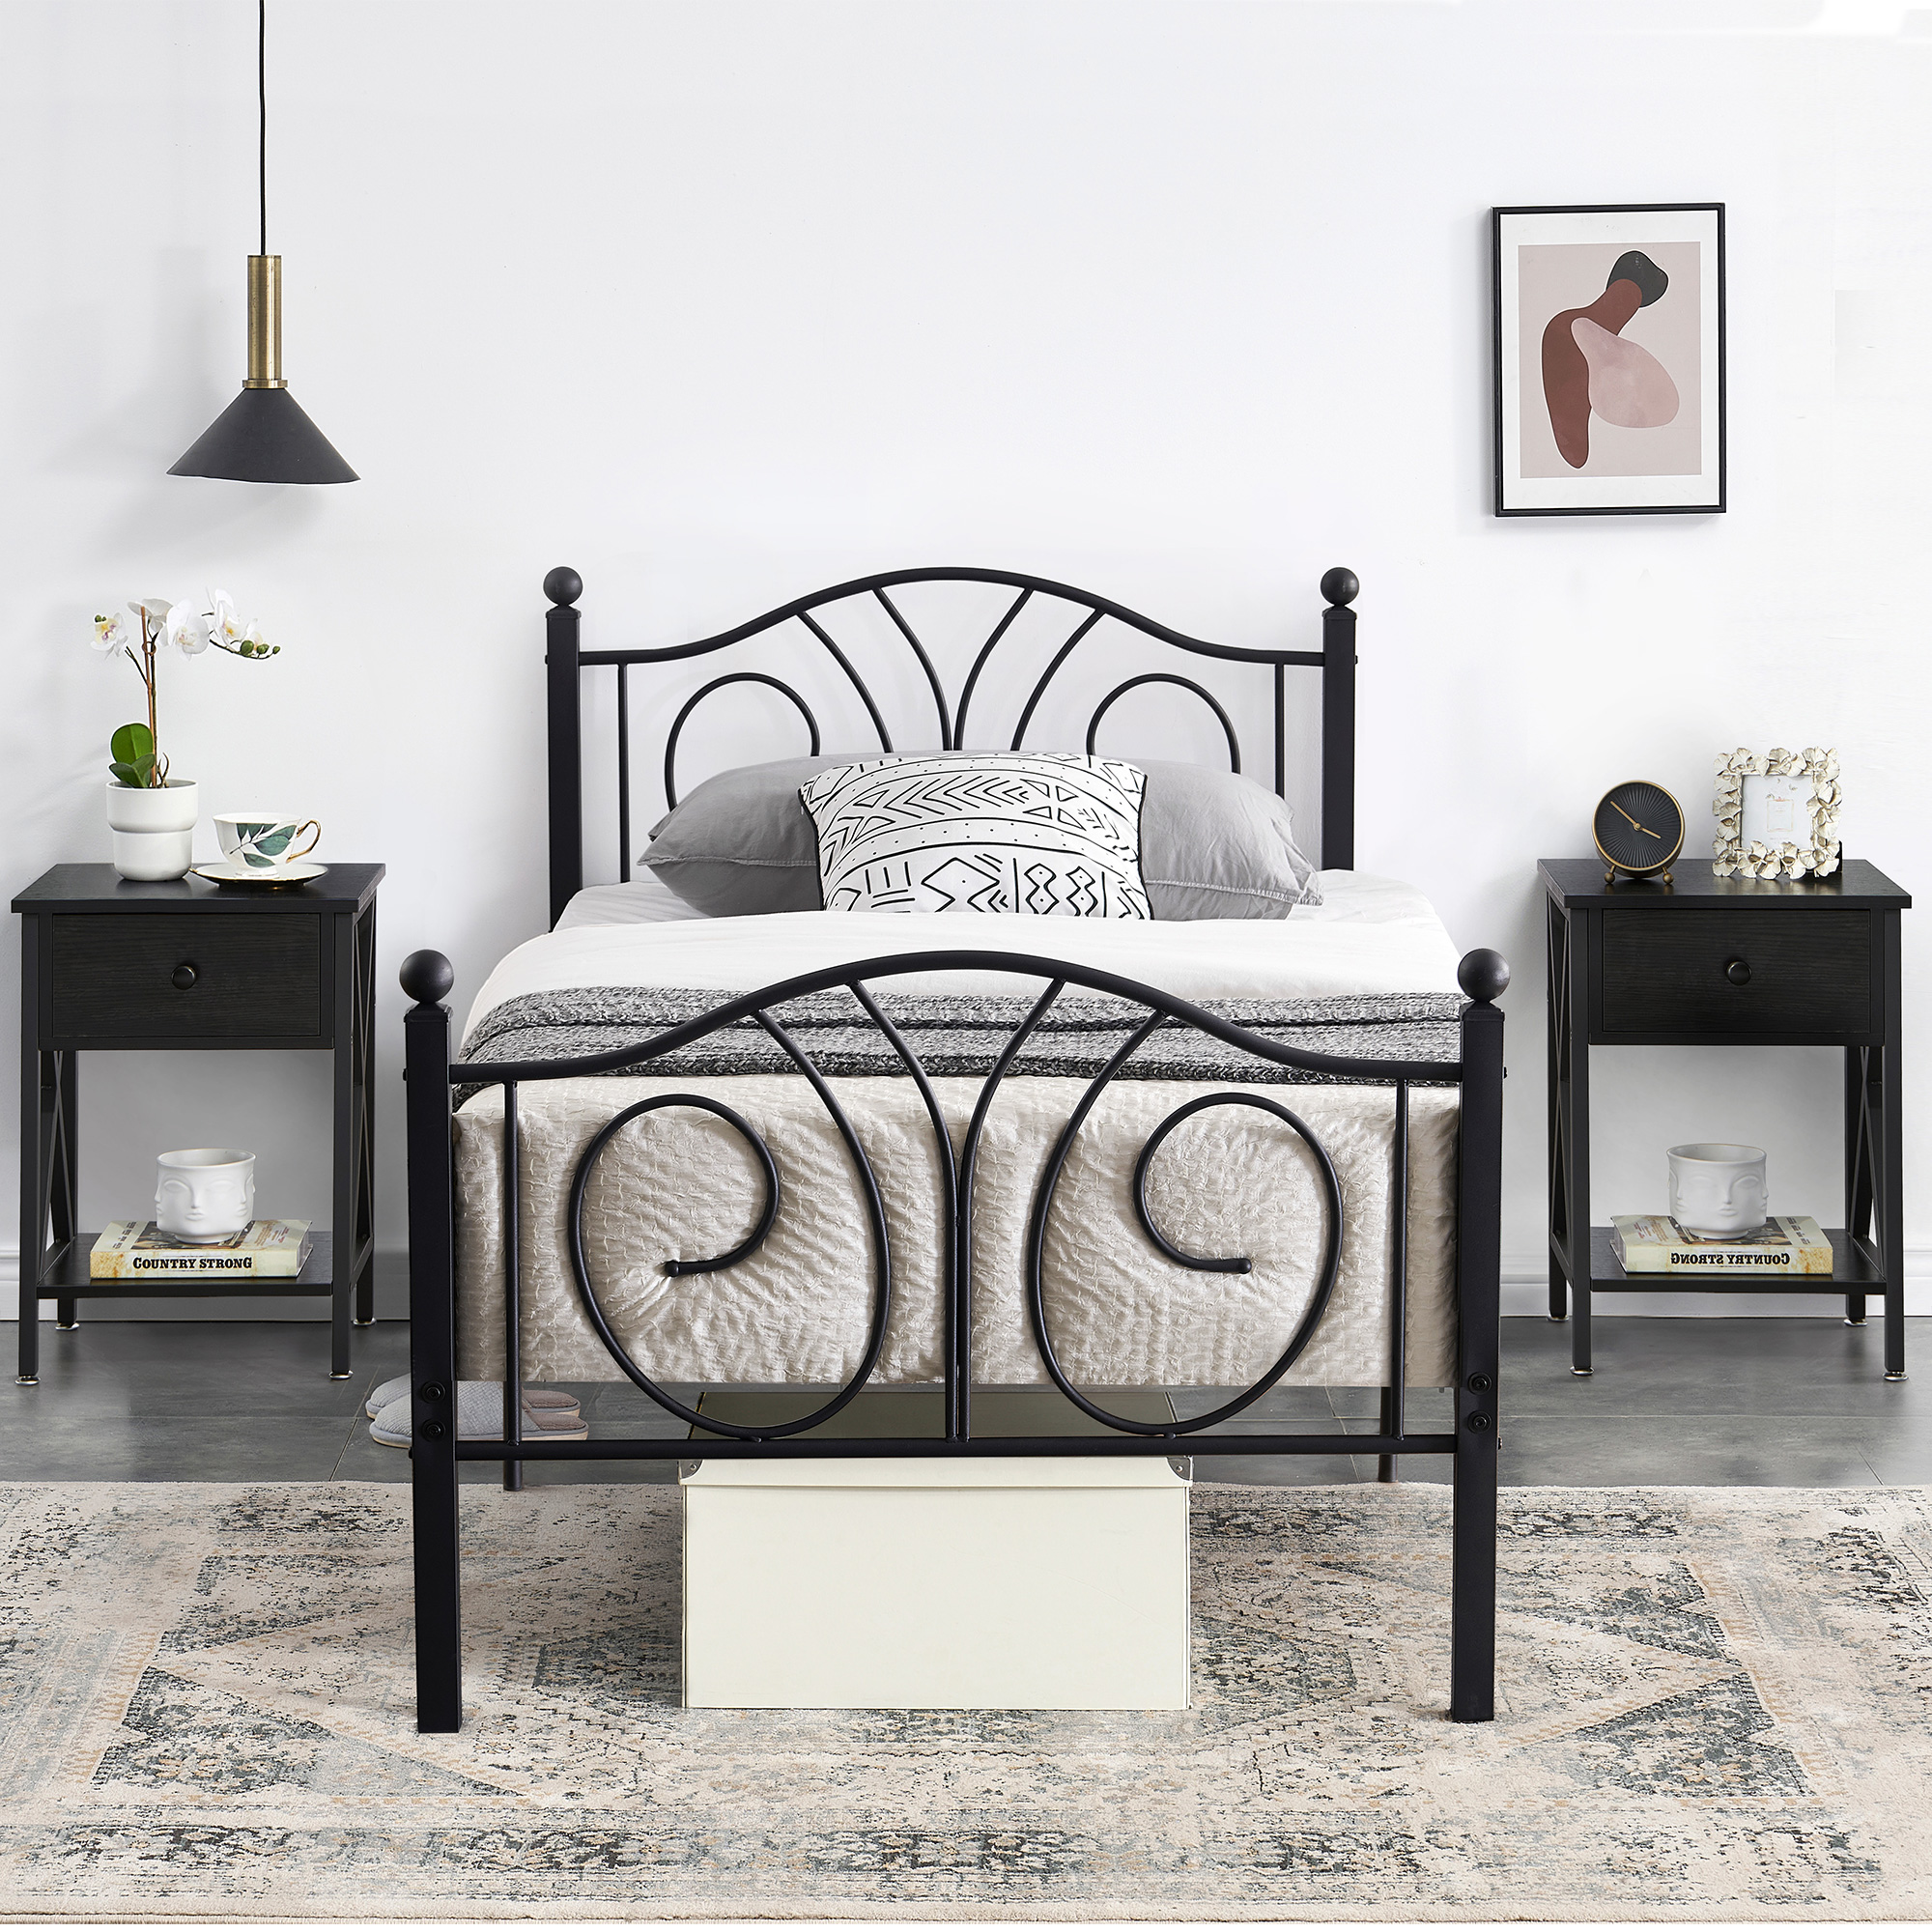 3-Piece Bedroom Sets, Twin Size Metal Bed Frame and 2 Black Nightstands - image 1 of 8